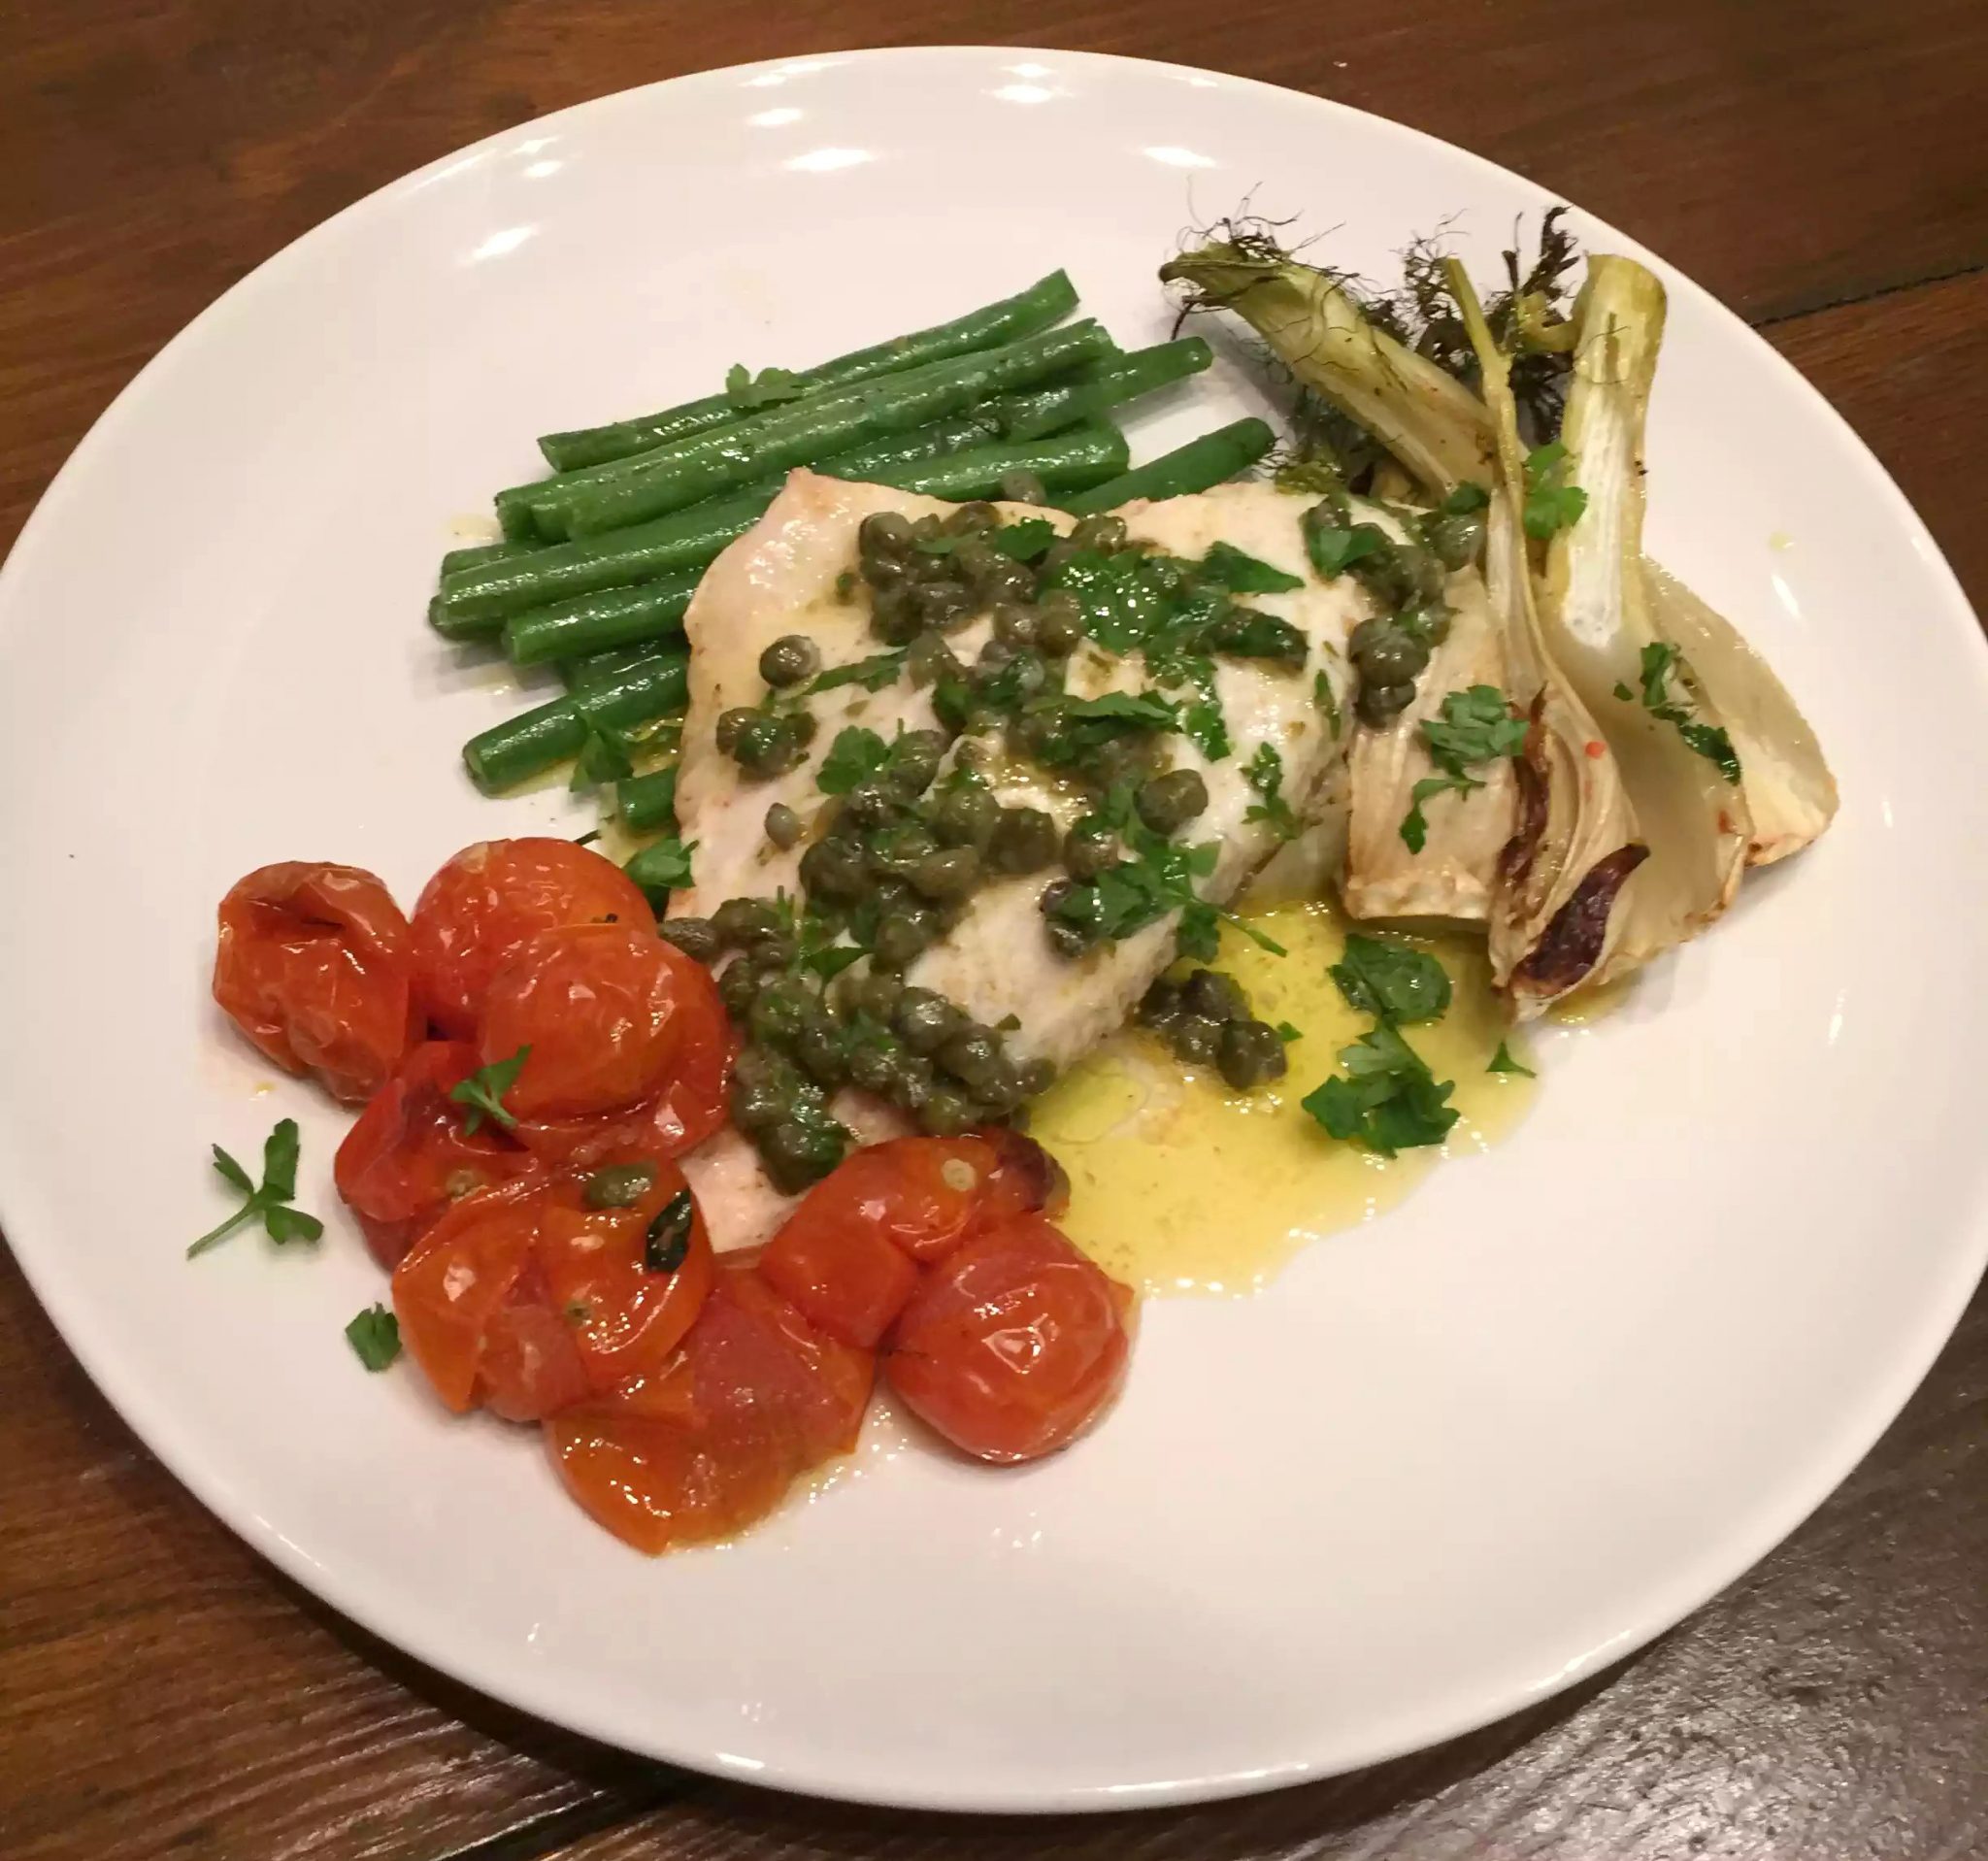 Pan Fried Sea-Bream with Lemon & Caper Butter Sauce